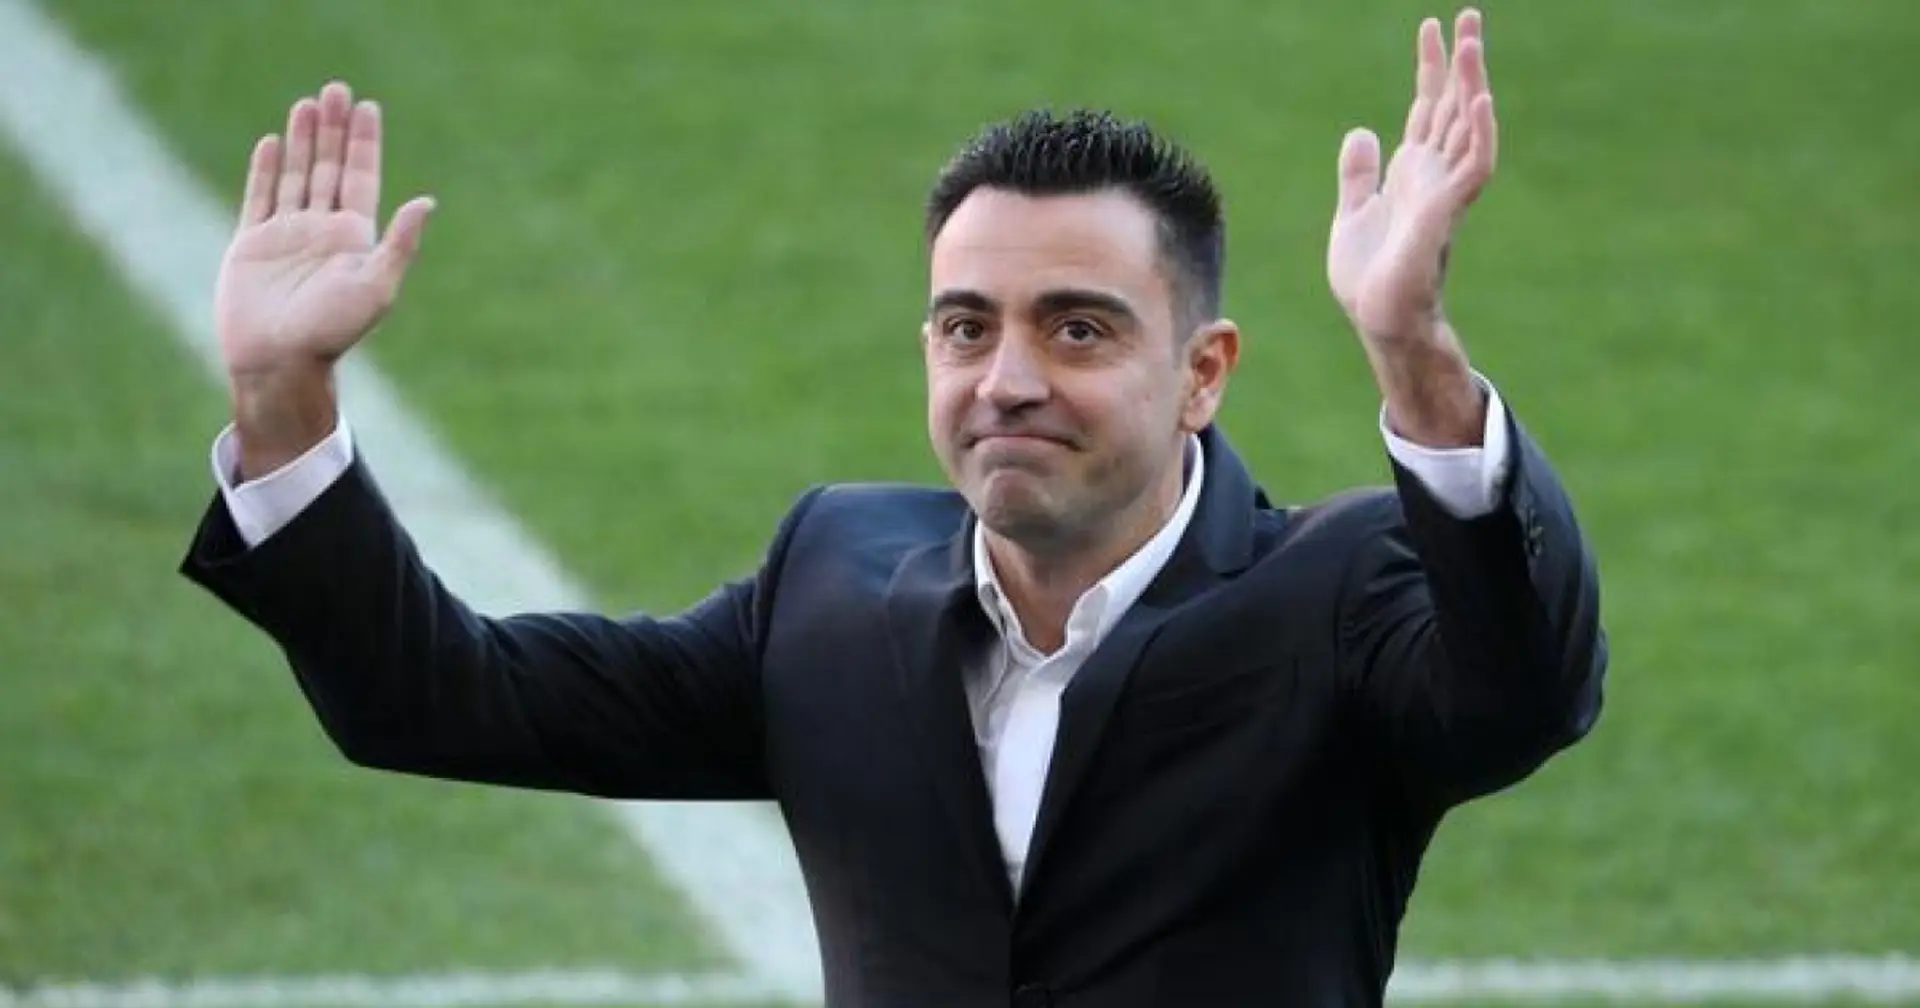 Real reason why Xavi is quitting Barca revealed, not for sabbatical